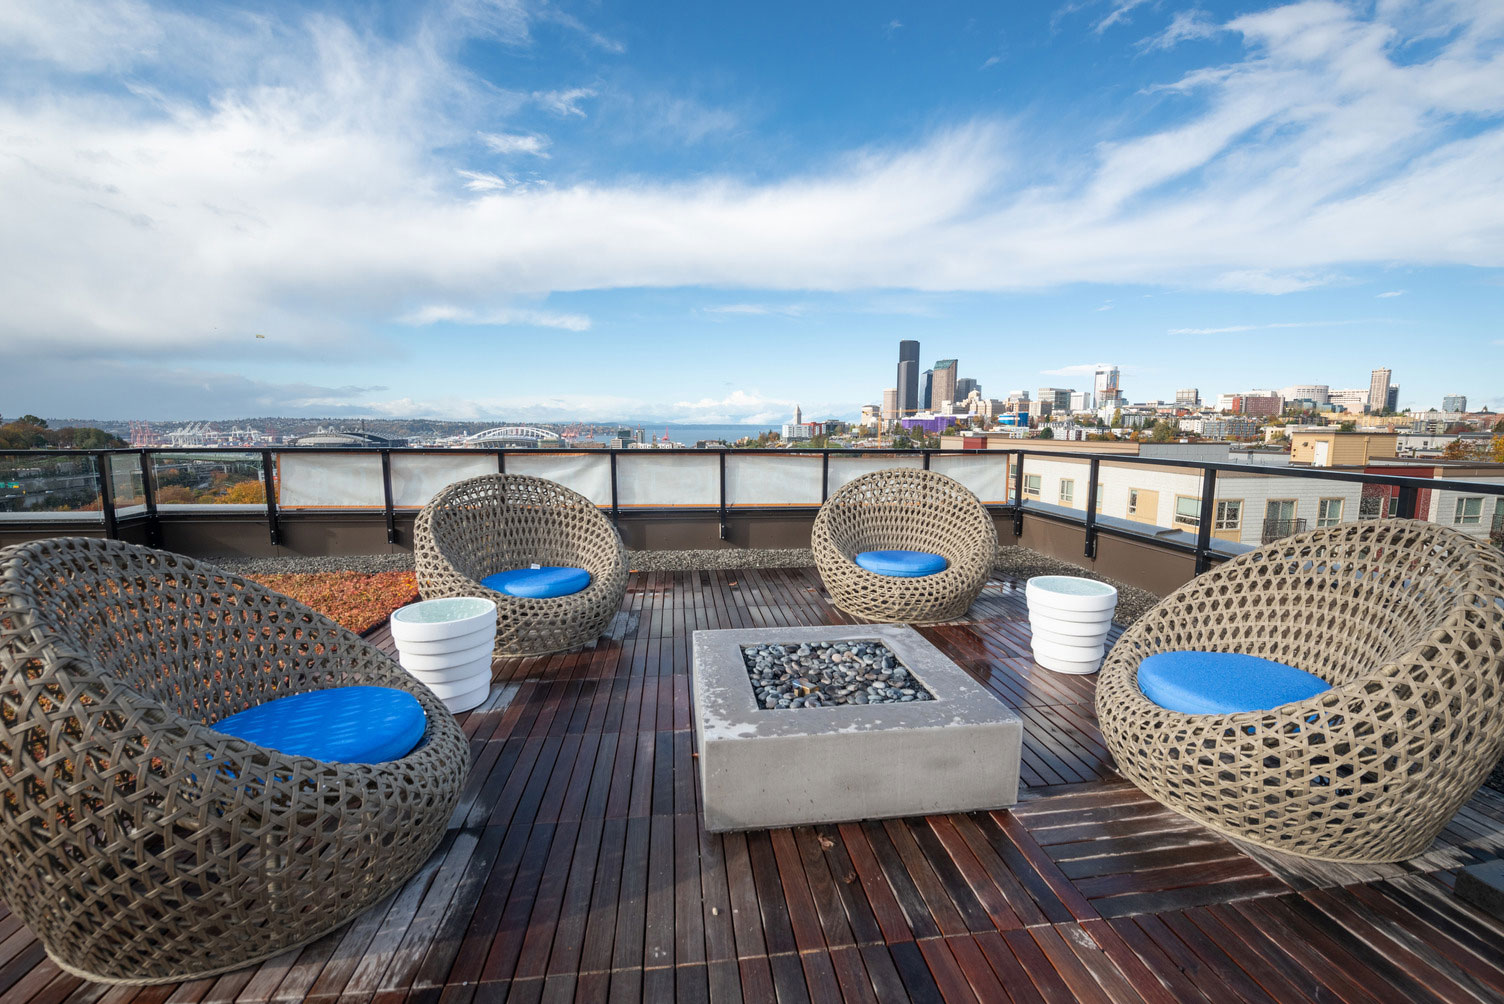 Rooftop overlooking city with chair seating around a firepit